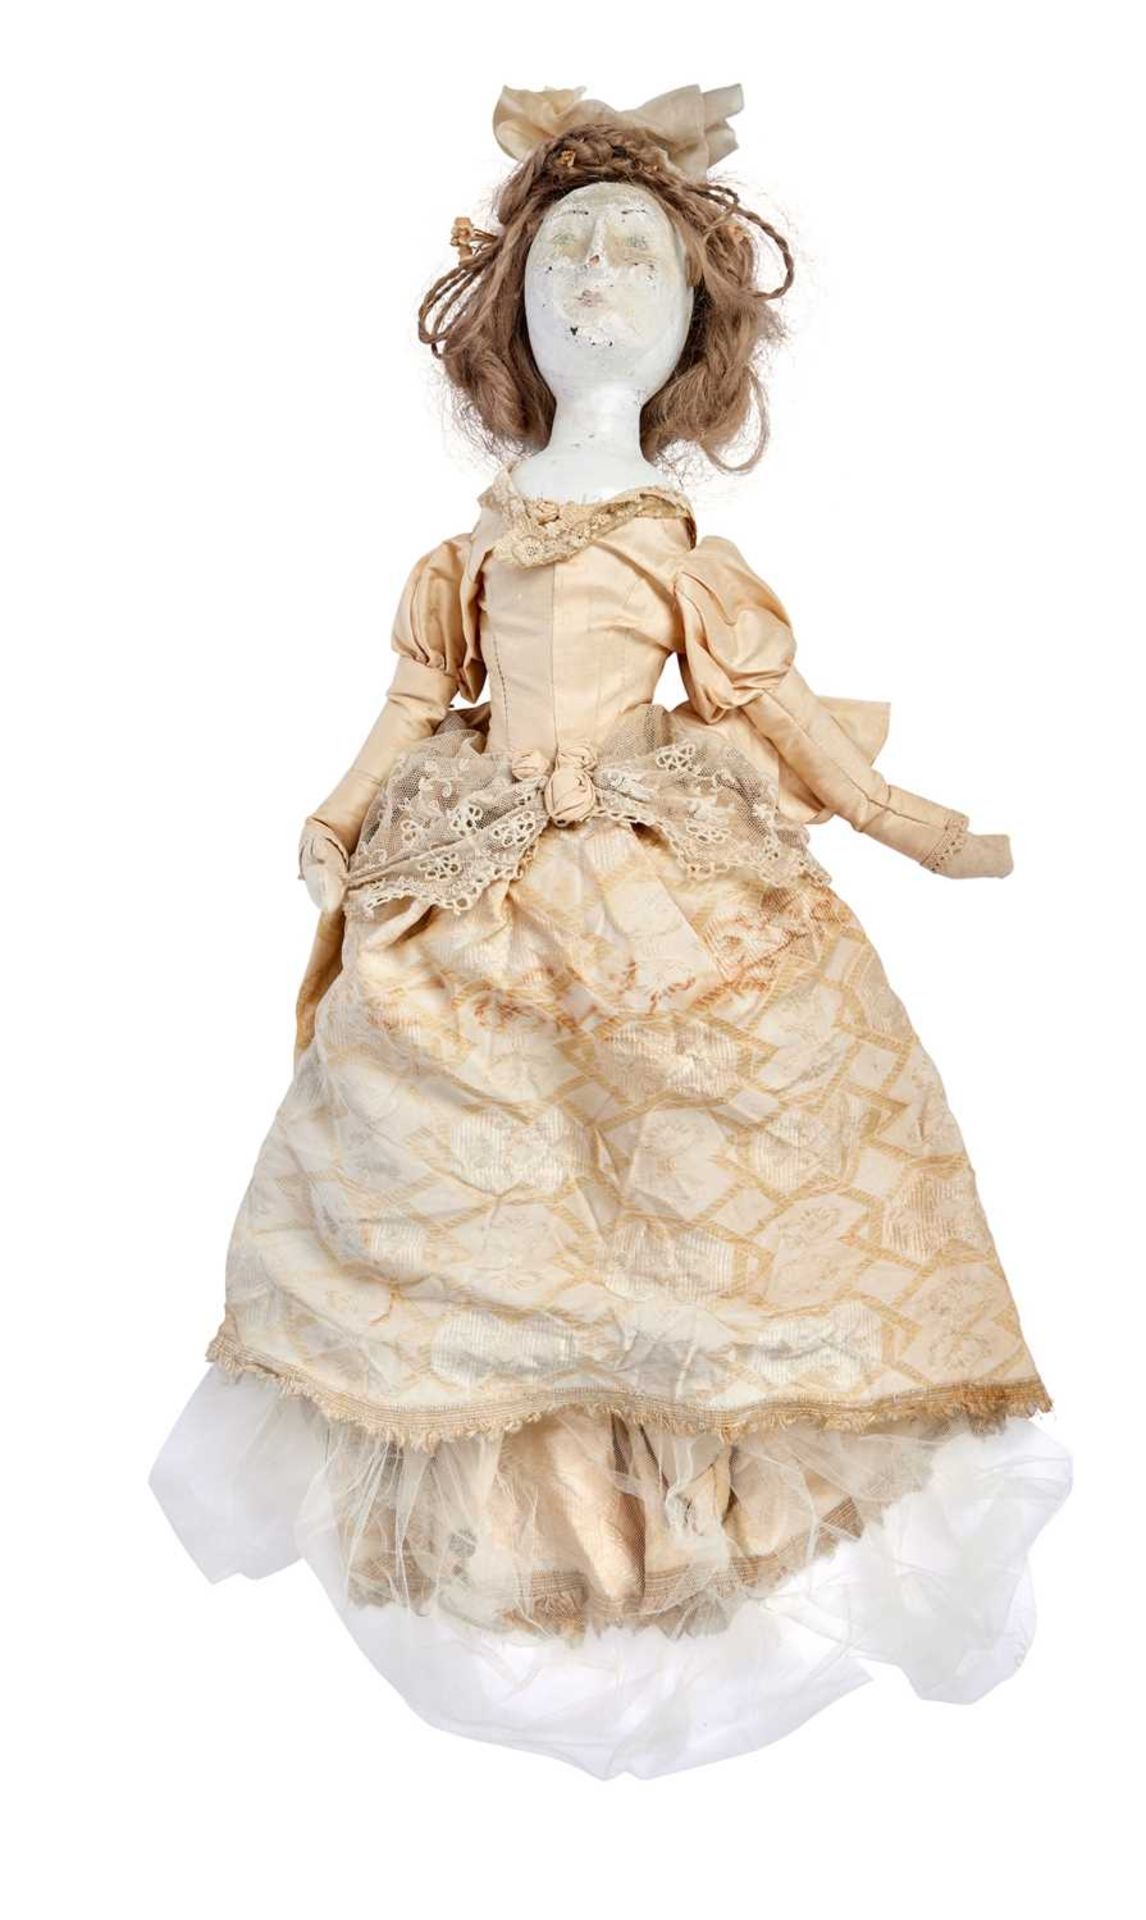 AN 18TH CENTURY STYLE WOODEN DOLL